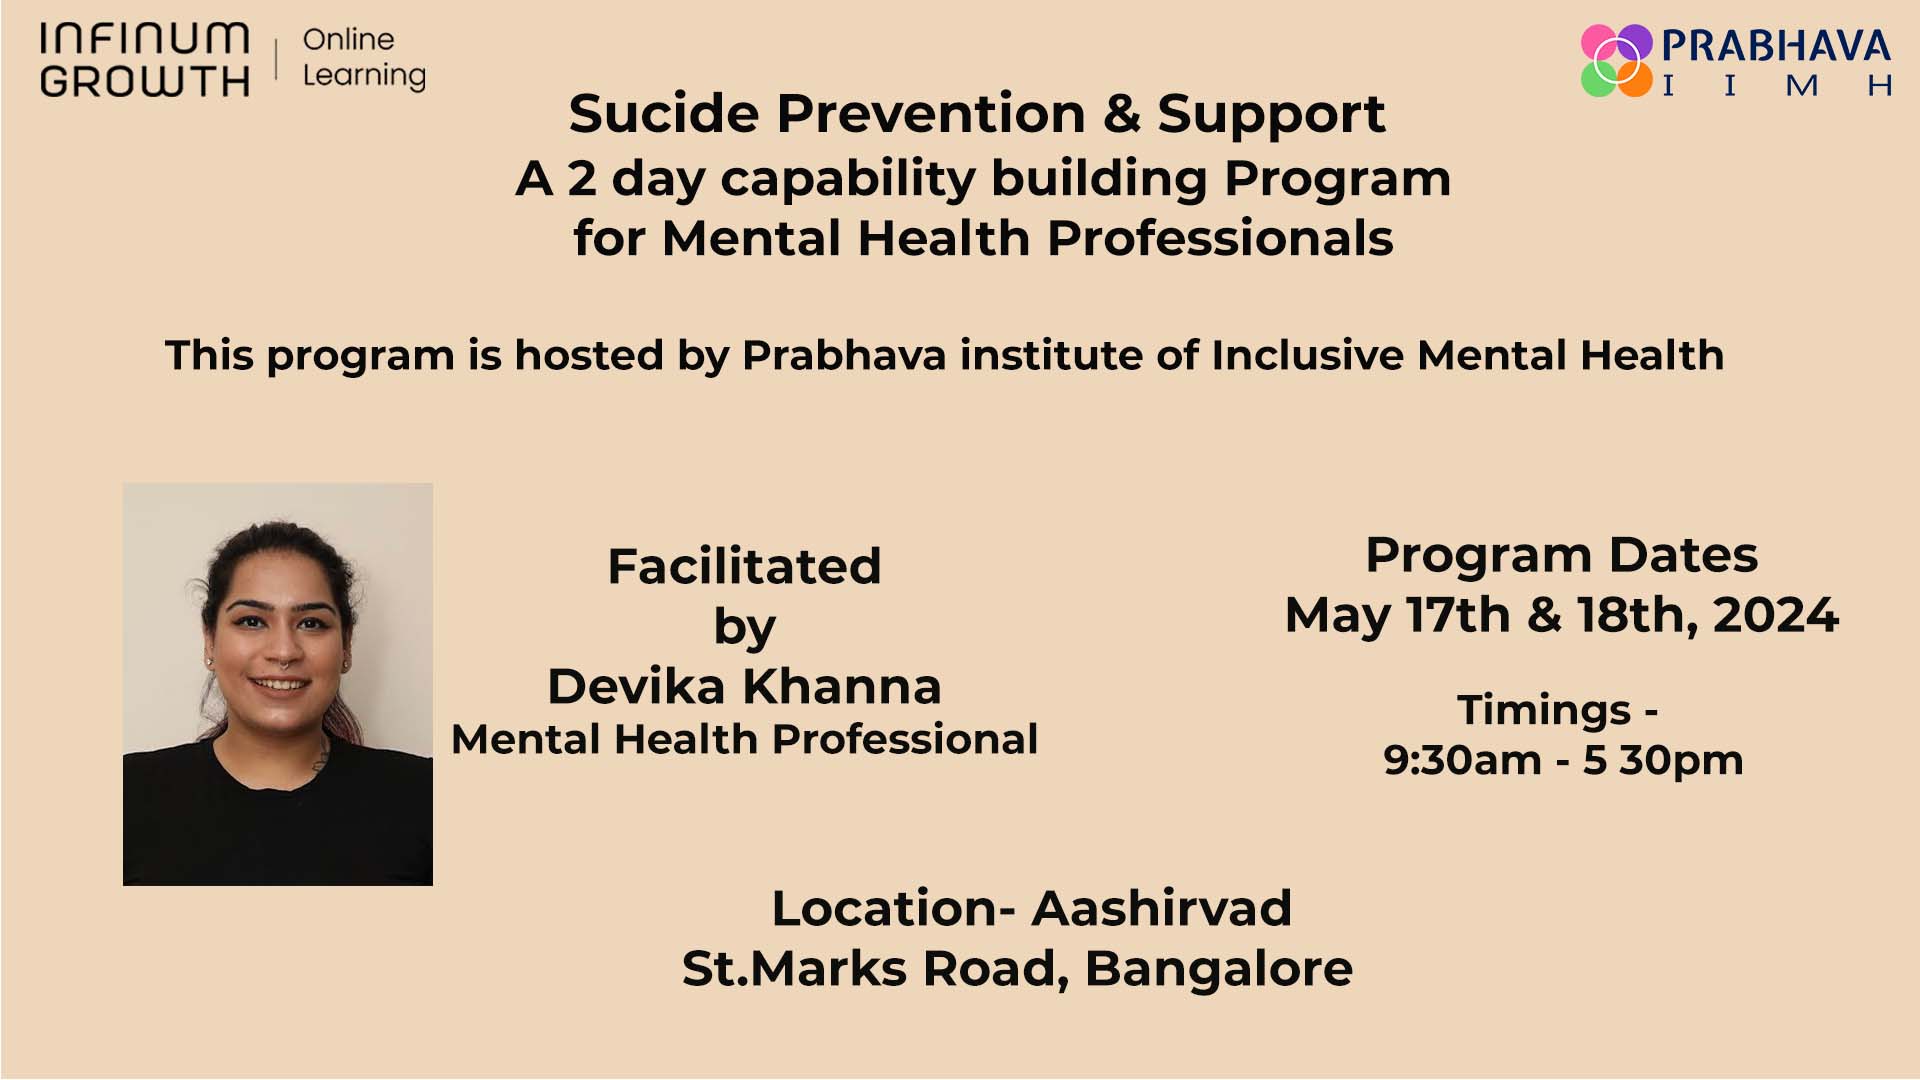 Suicide Prevention & Support: 2 Day capability building program for mental health professionals